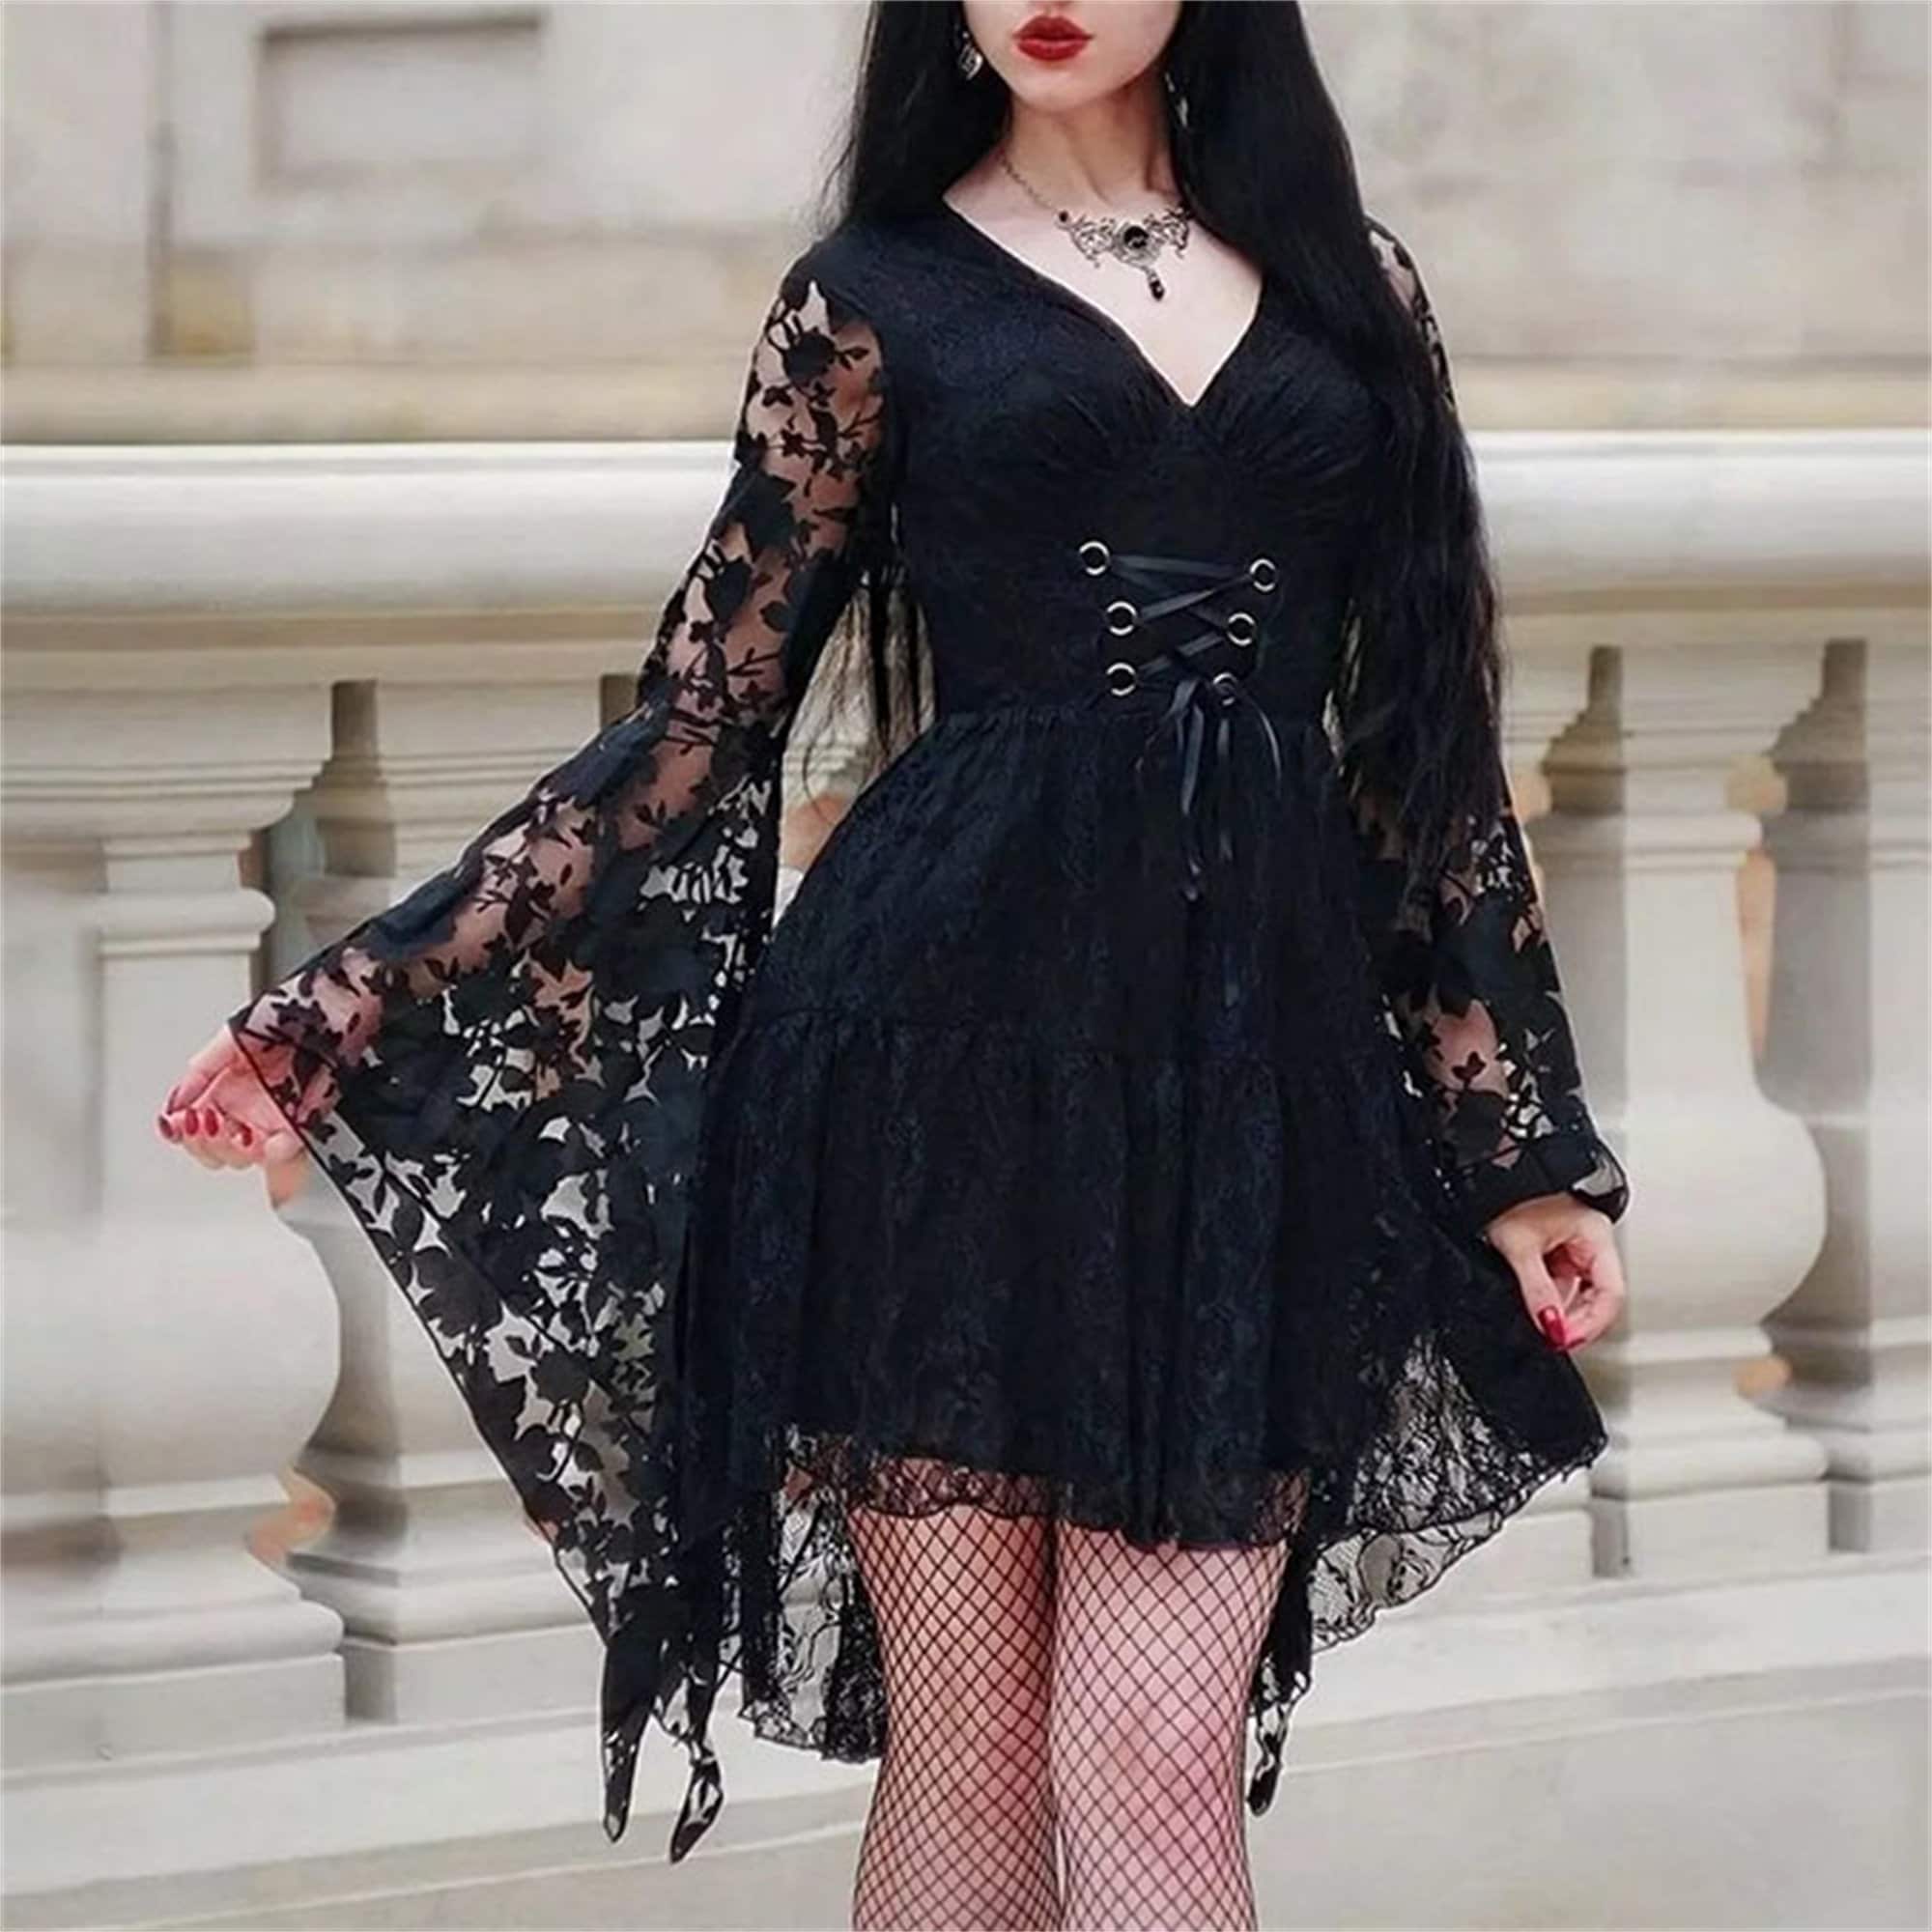 Cold Shoulder Gothic Dress Goth Retro Lace Dress Gothic Long Flared Sleeve Gothic Sexy Lace Up Square Neck Dress Gothic Cosplay Witch Clothe